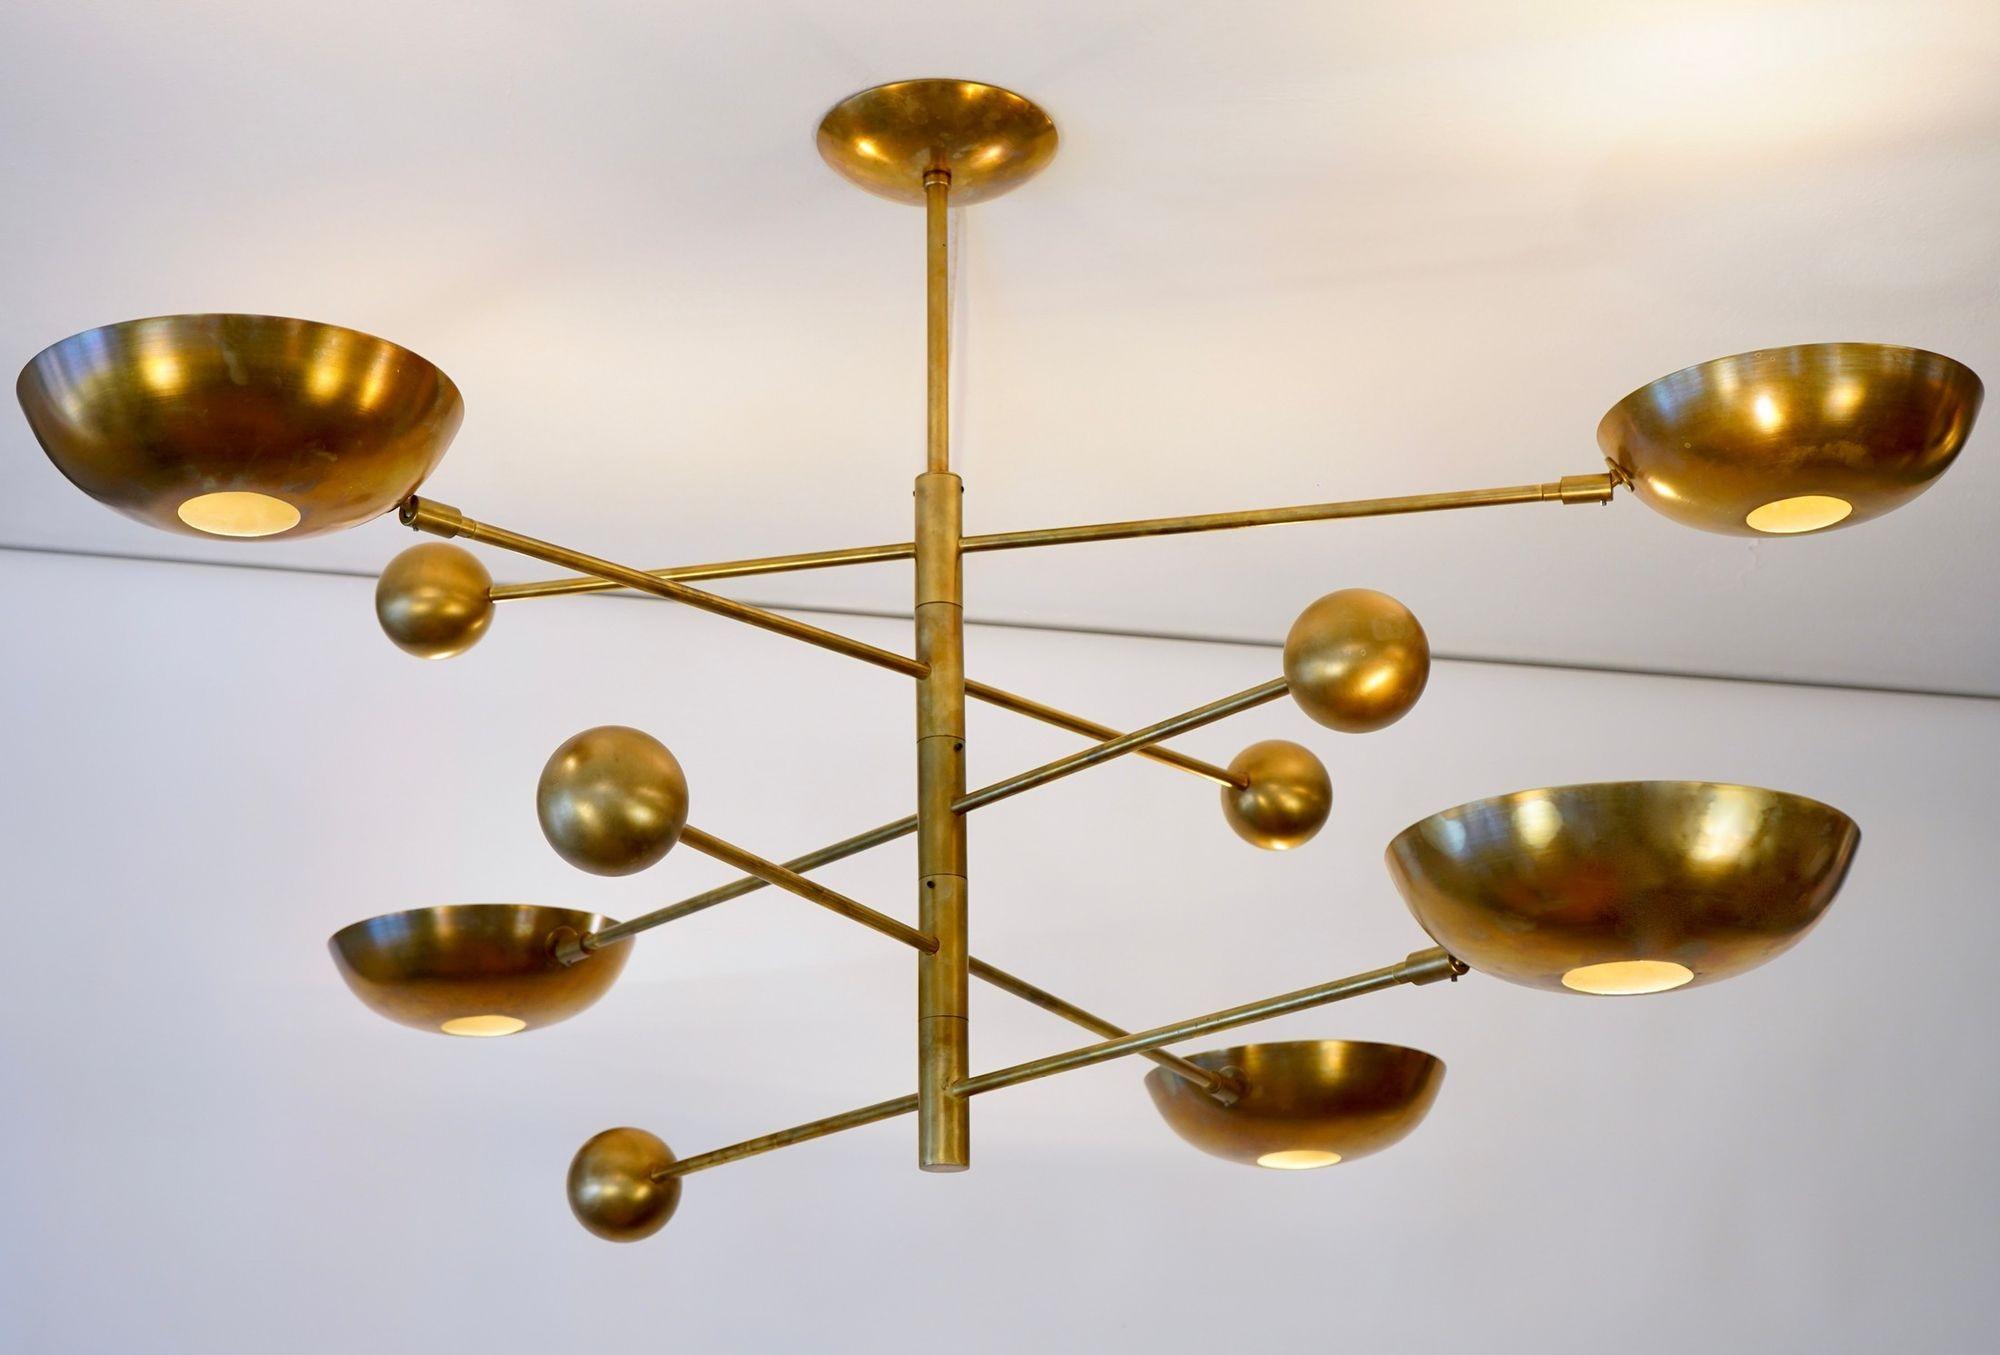 Patinated Orbitale Brass Chandelier 5 Rotating Balanced Arms, All Brass and Natural Patina For Sale